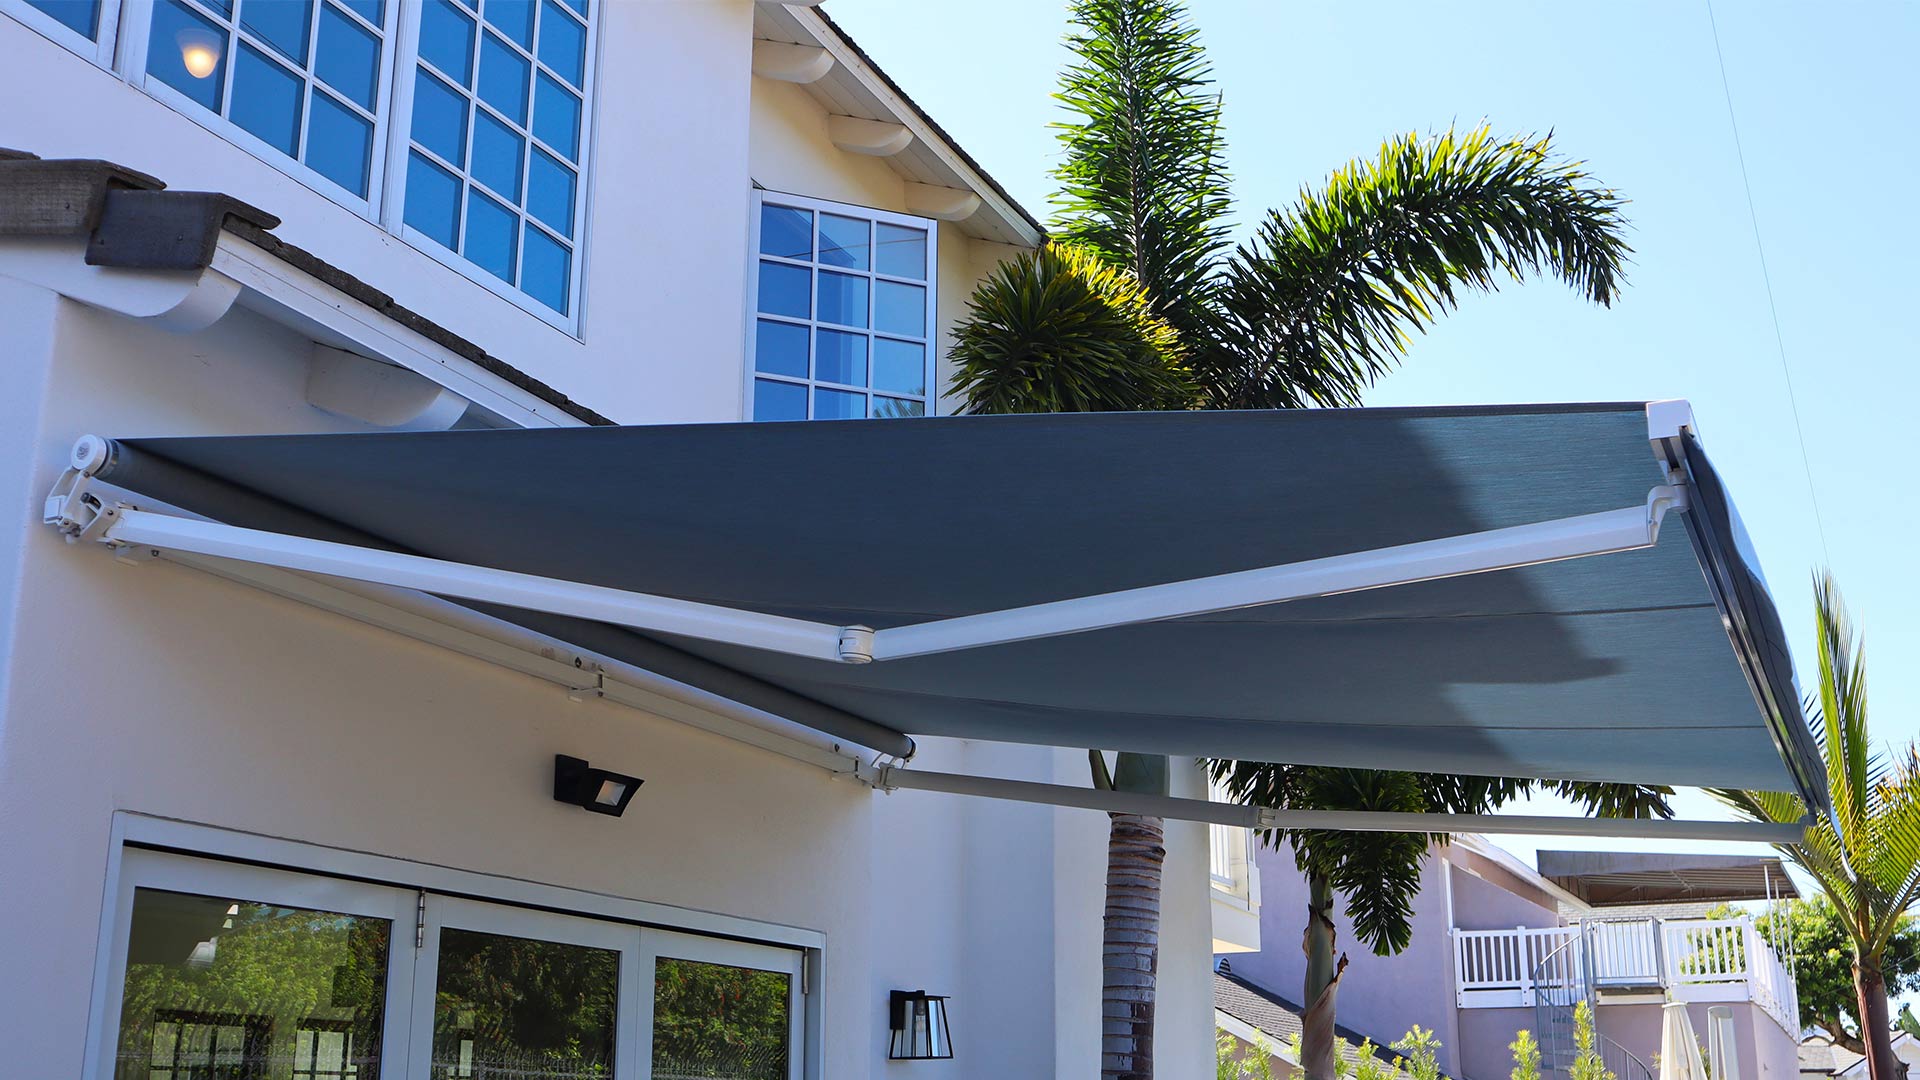 residential property exteriors side view with fabric awning installed san diego ca